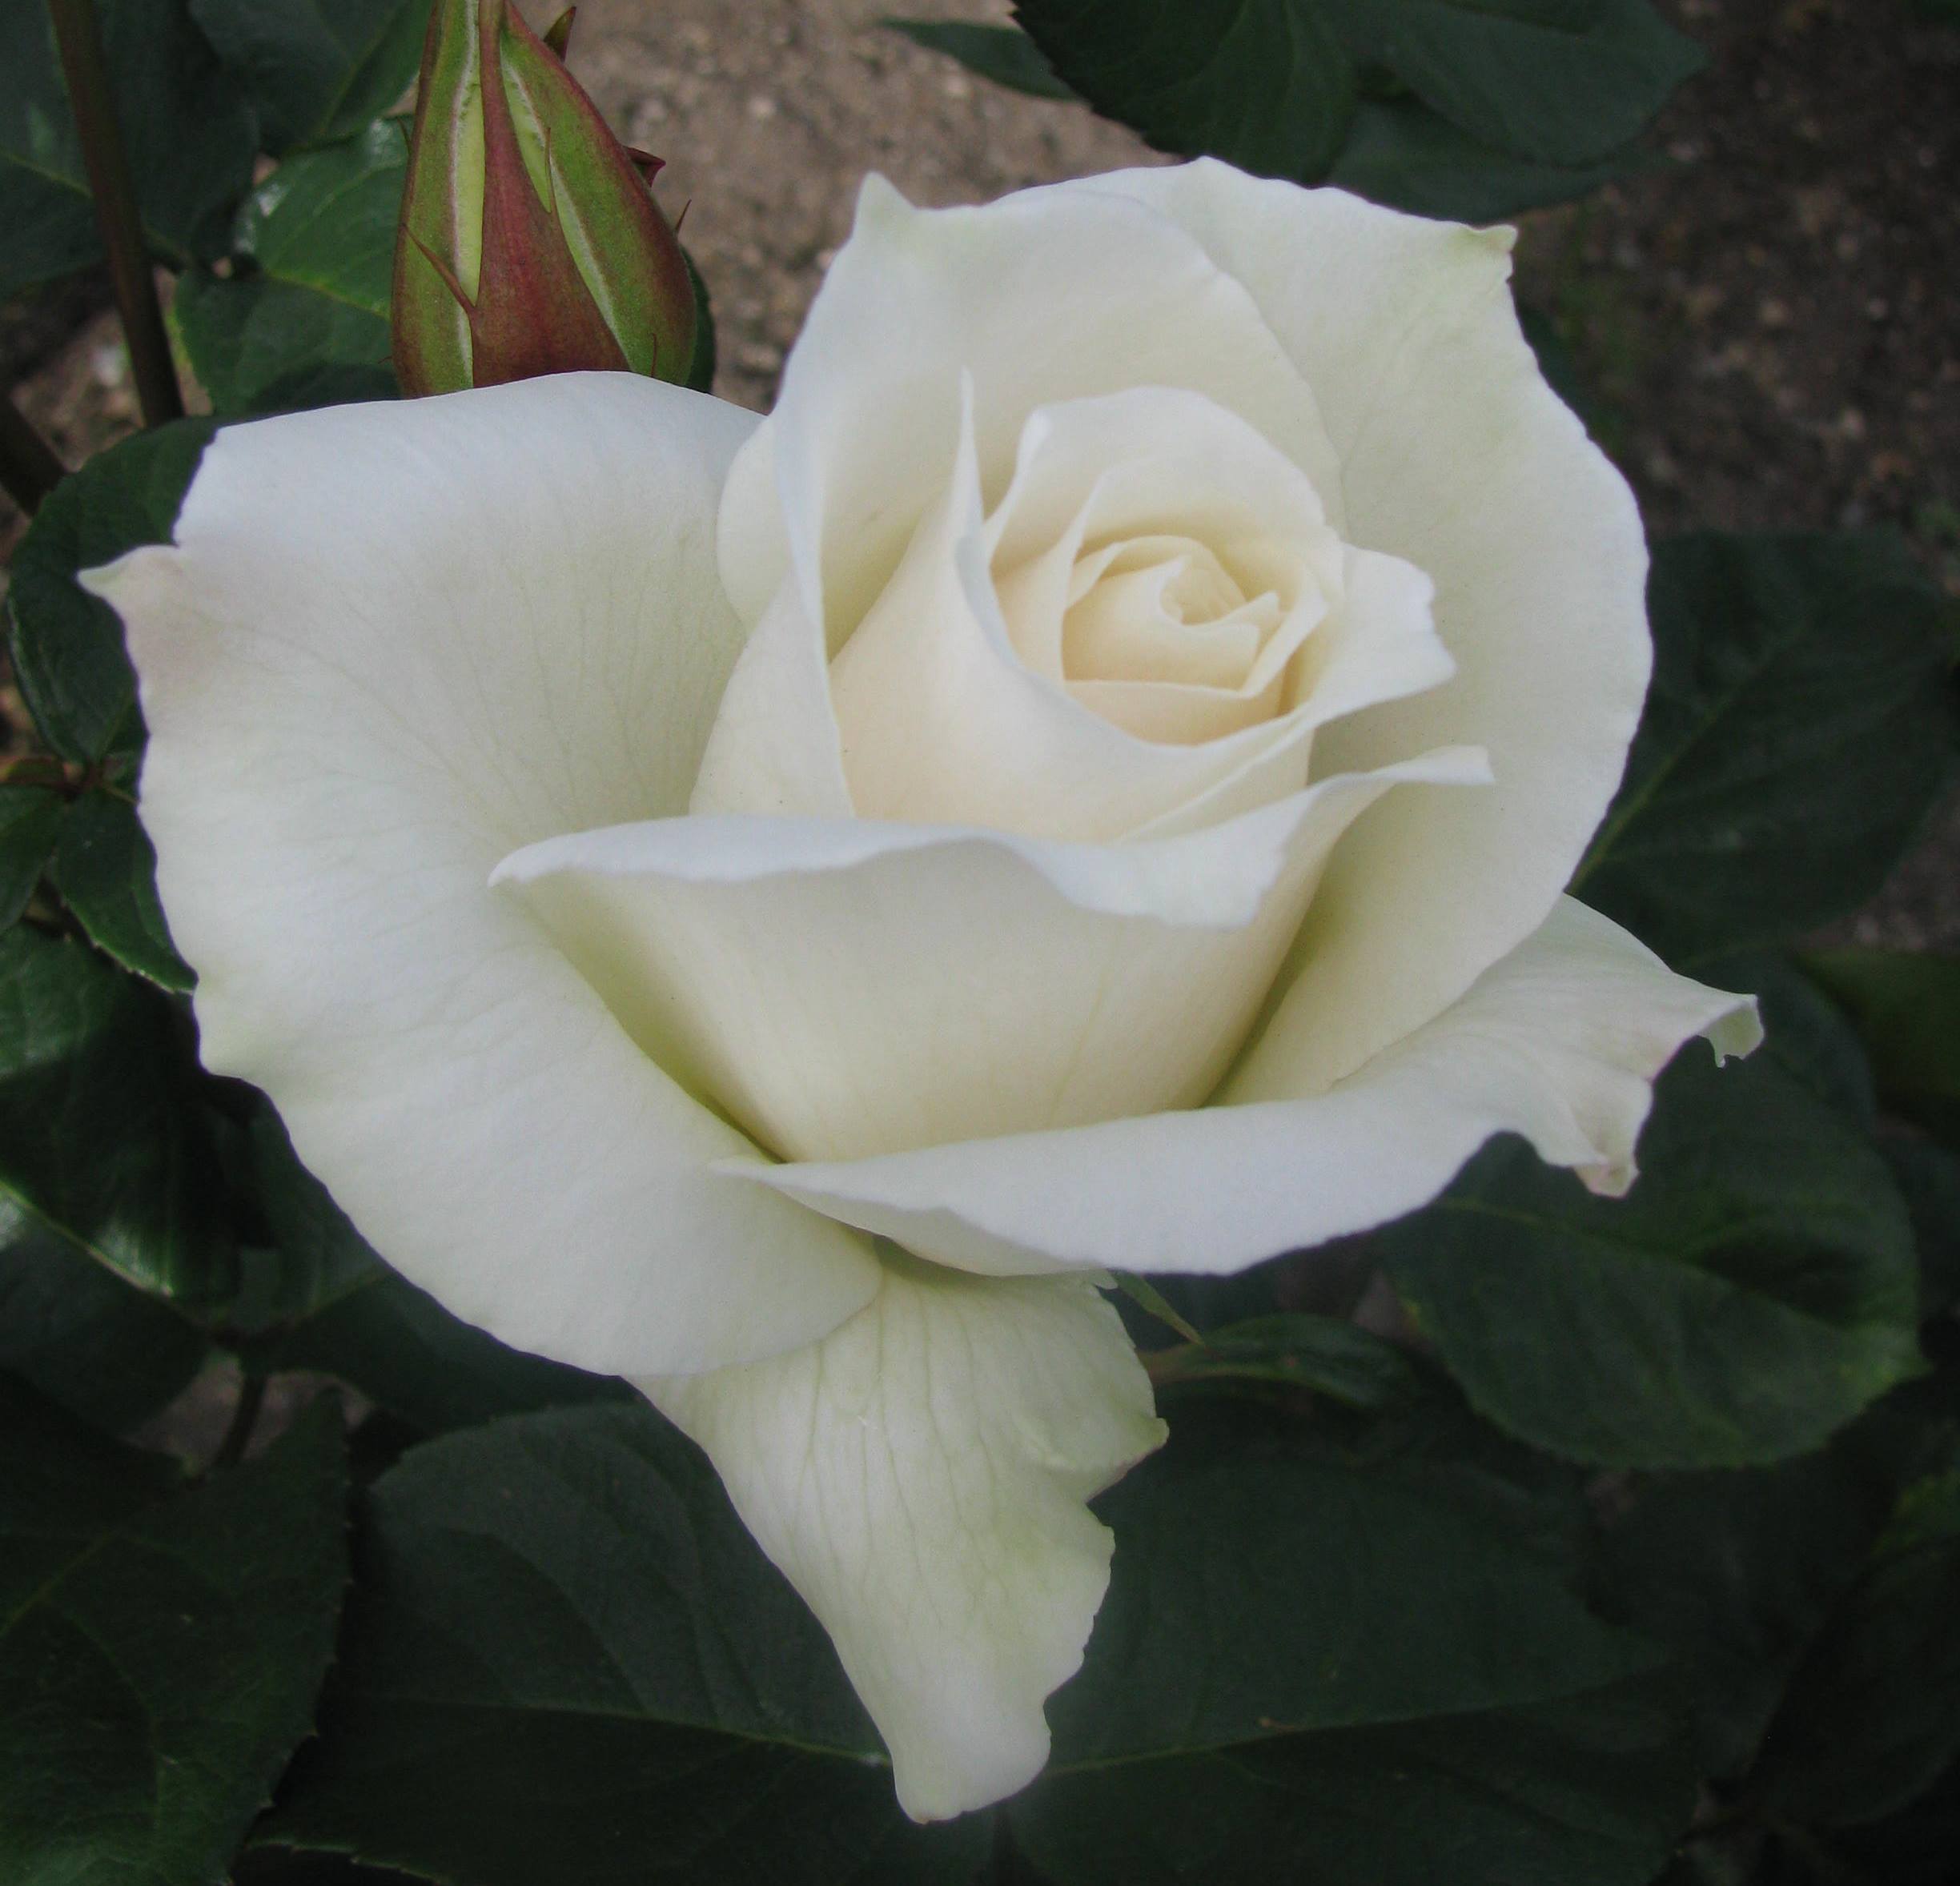 August - Pascali - The New Zealand Rose Society